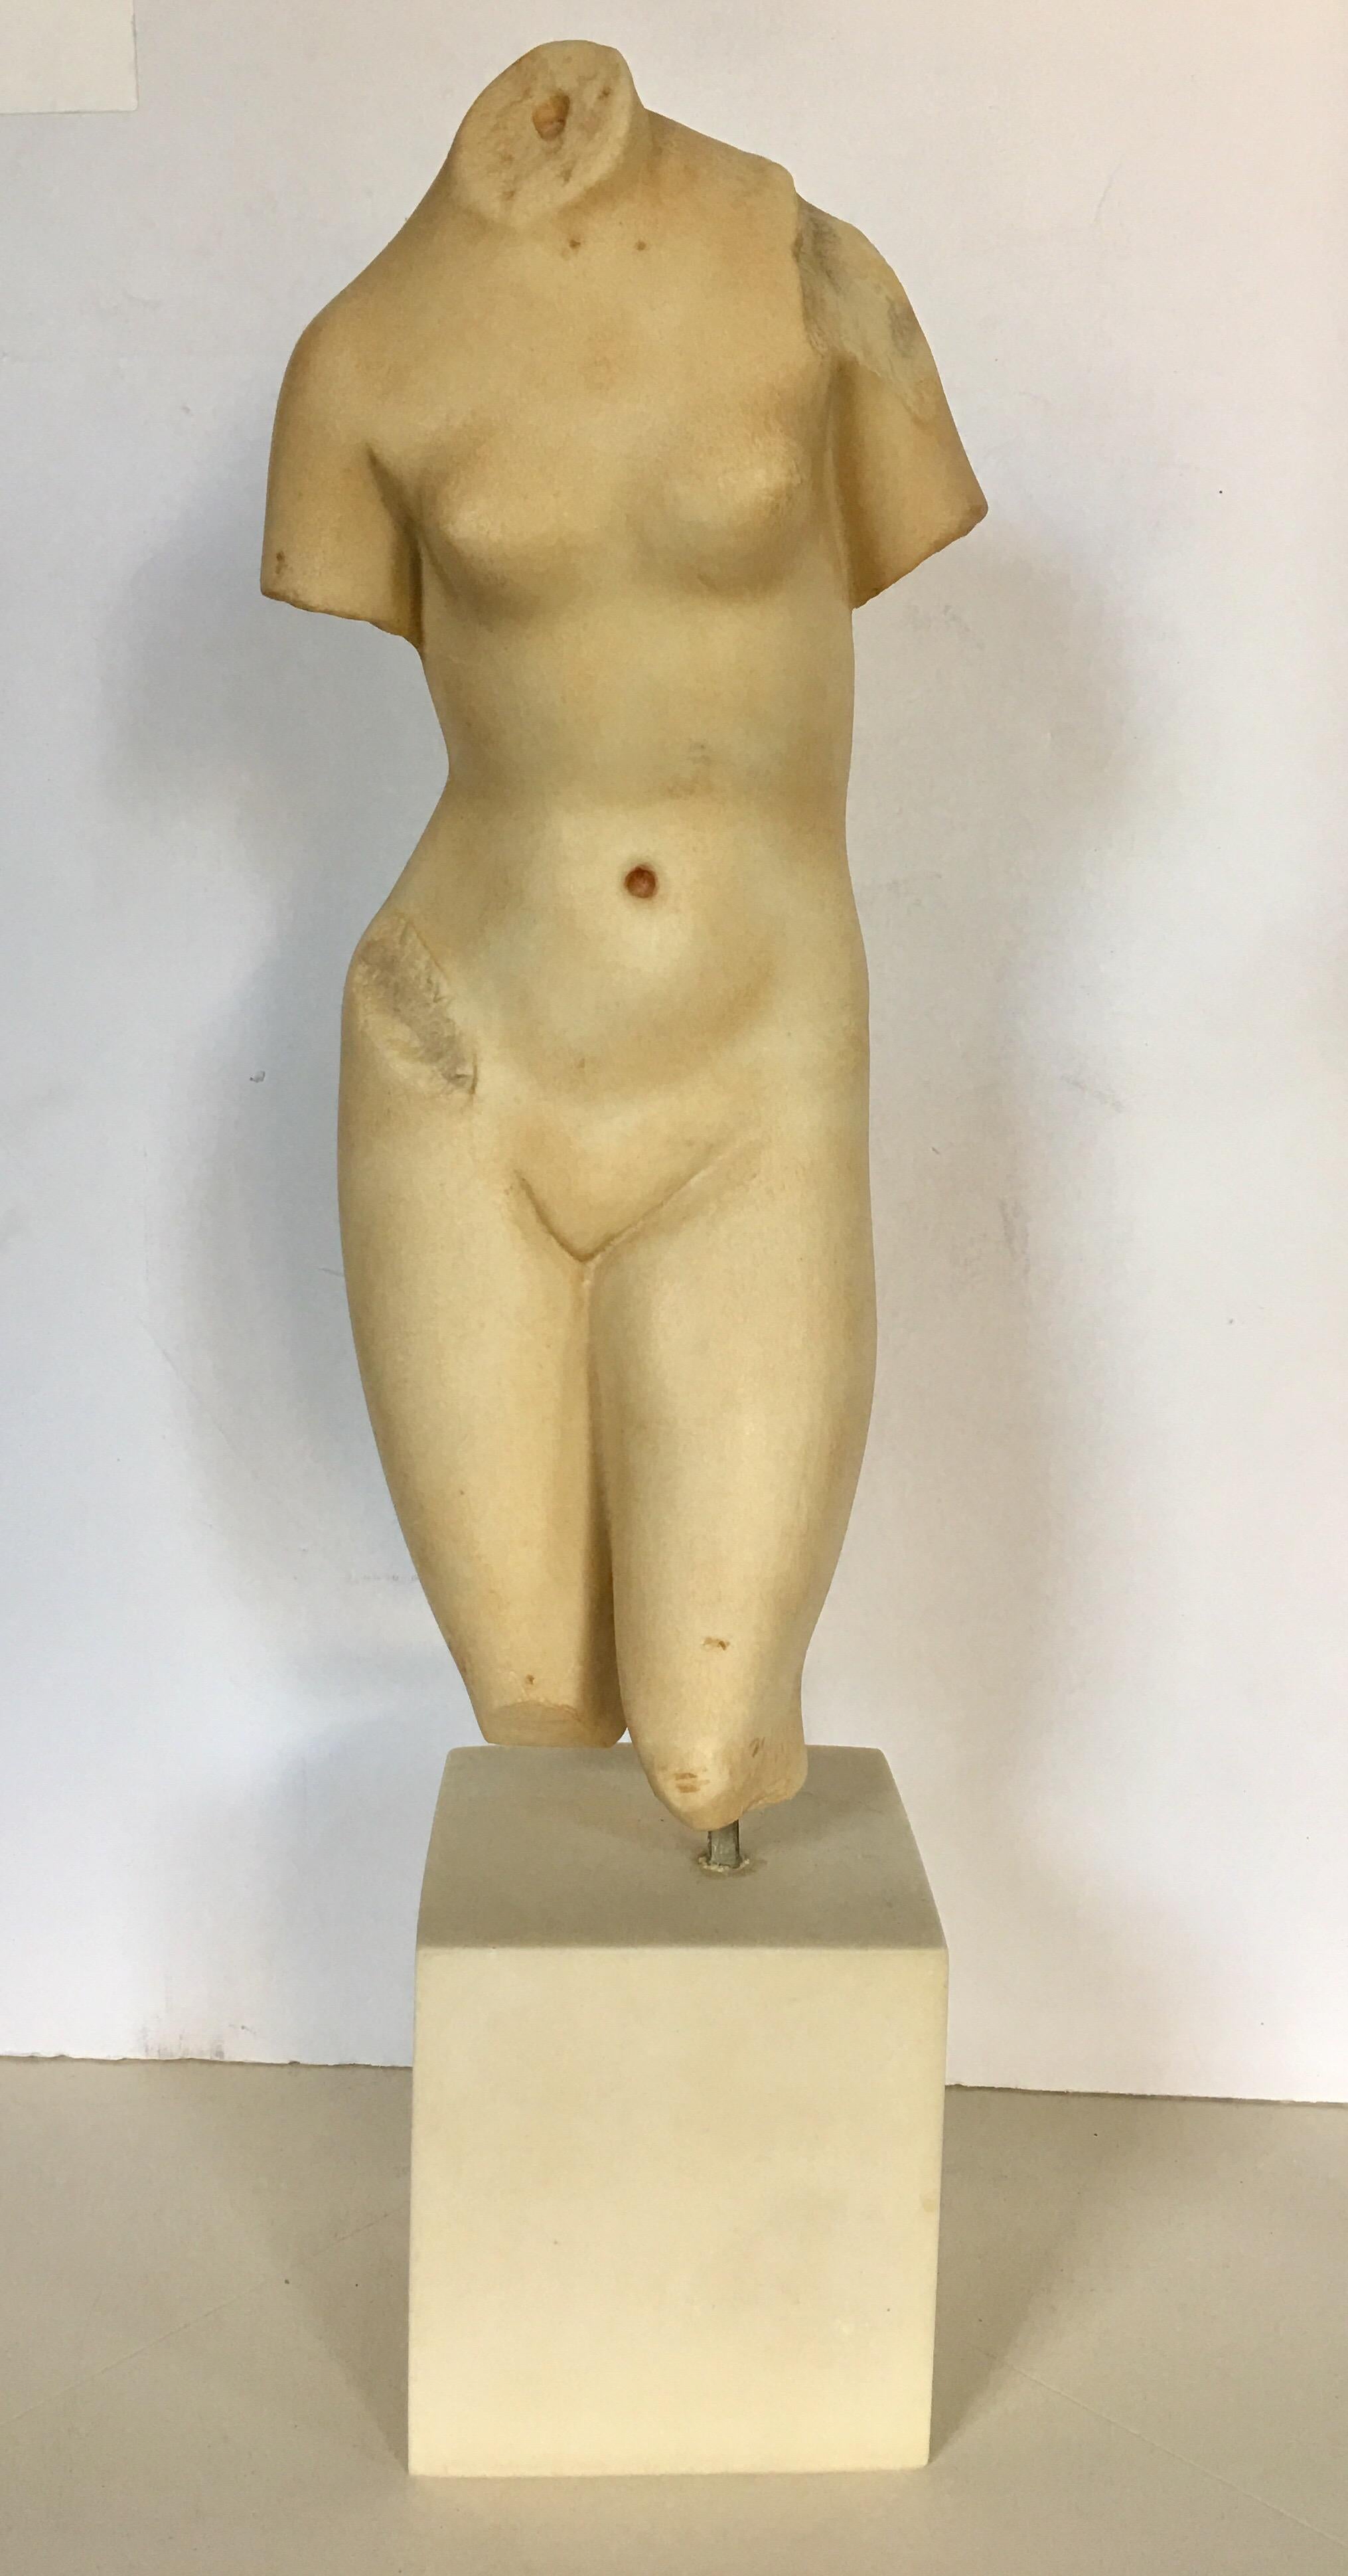 Modern Museum of Art sculptural reproduction of Aphrodite. This female form torso sculpture is constructed of a faux marble alabaster heavy weight resin and is mounted with a brass rod on a square plinth base. Beautiful tabletop accessory accent